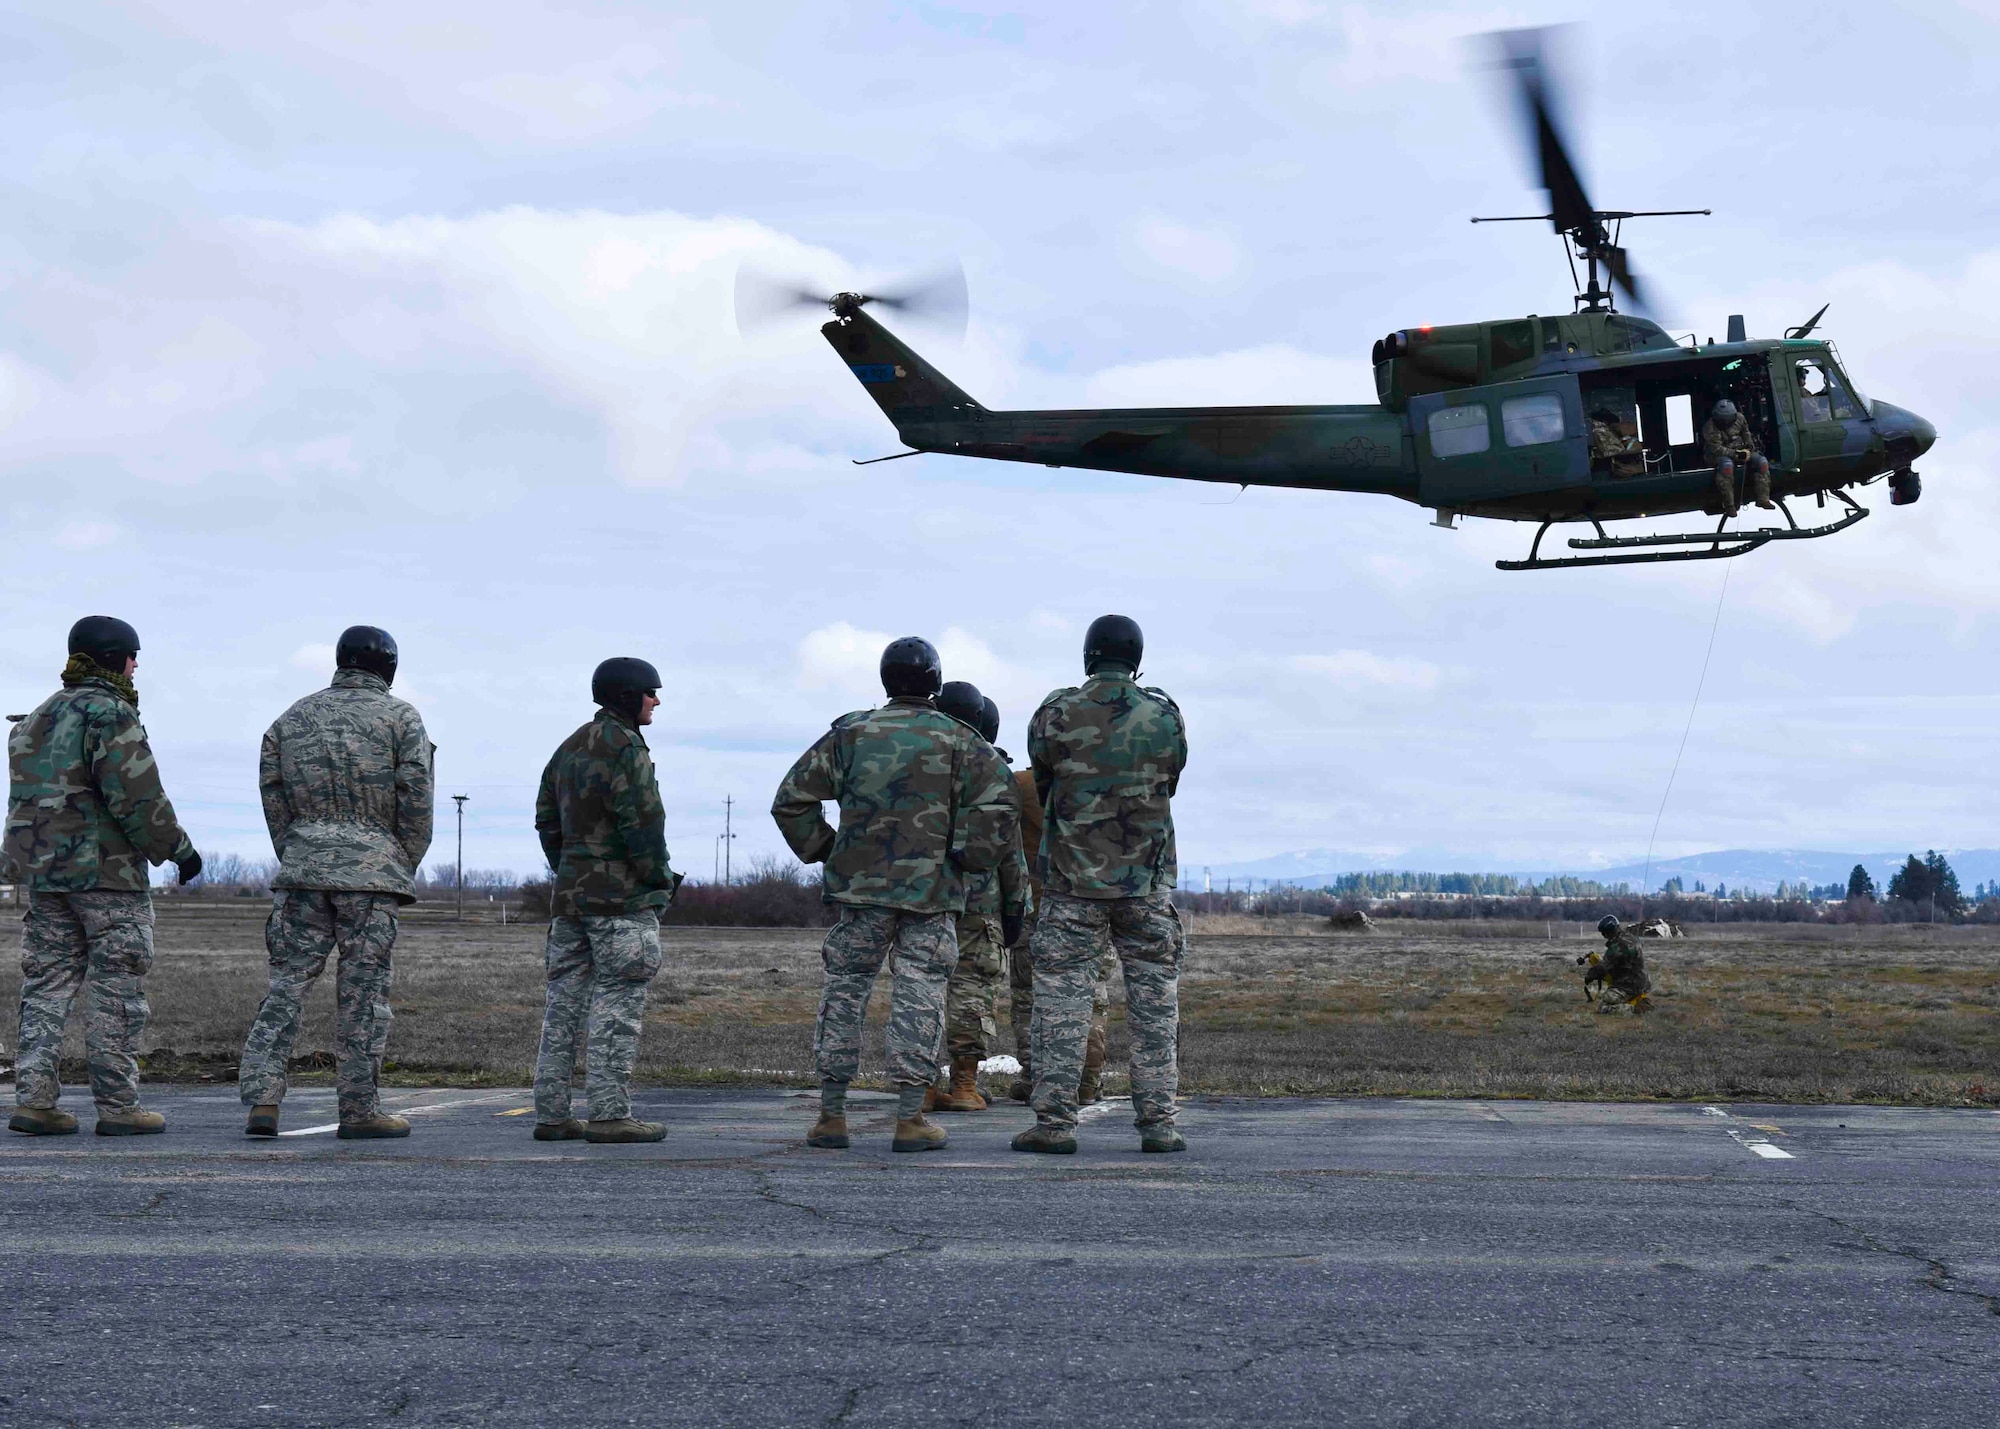 Students from the Survival, Evasion, Resistance and Escape school watch as their fellow student is hoisted into a Bell UH-1N Iroquois helicopter as part of training at Fairchild Air Force Base, Washington, Jan 30, 2020. Students from the SERE school go through a 19 day course that includes water training, outdoor survival, and being hoisted into a helicopter. (U.S. Air Force photo by Airman 1st Class Kiaundra Miller)